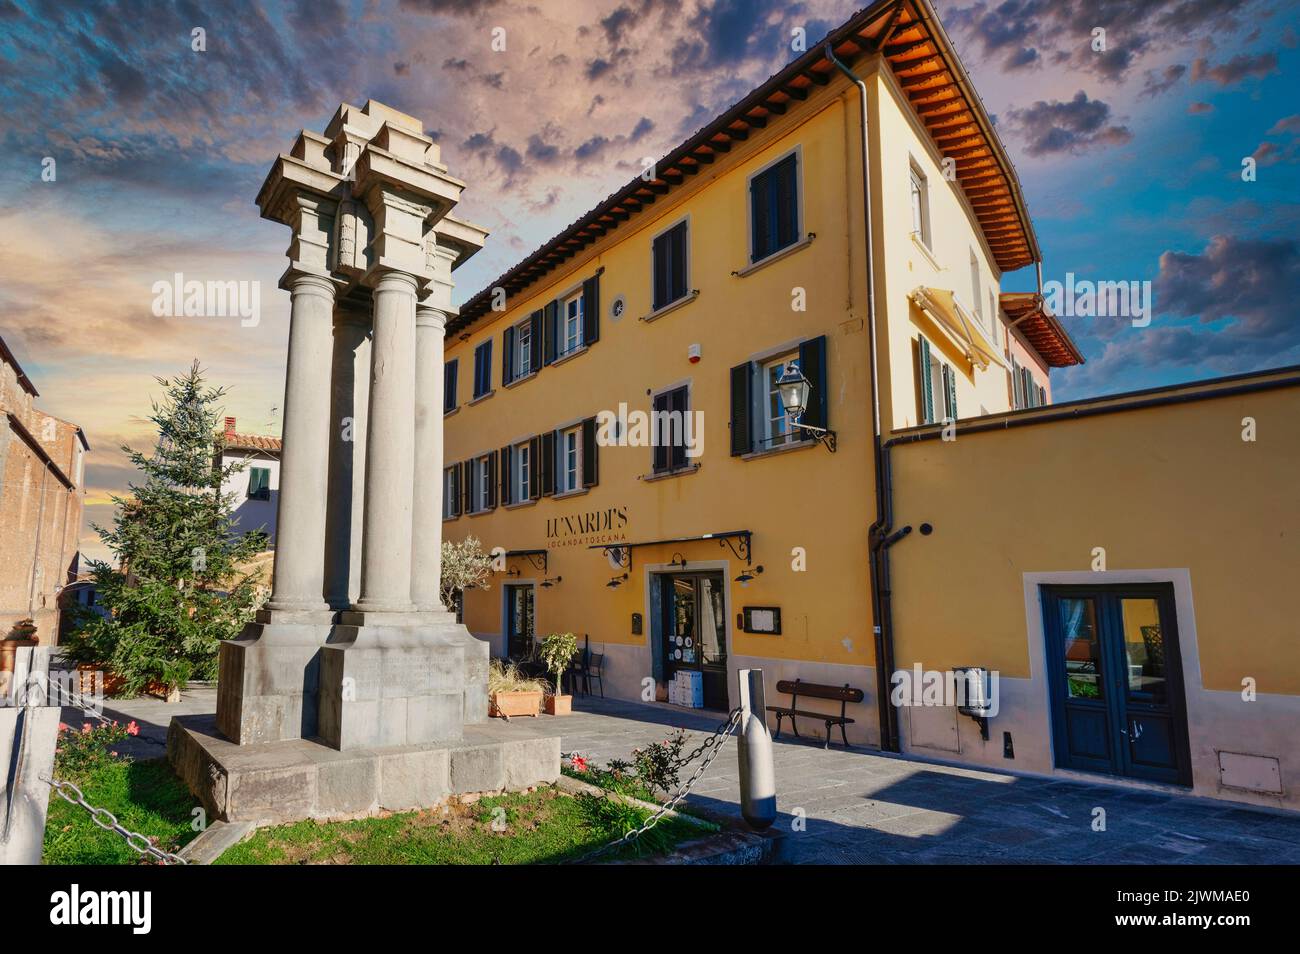 The war memorial in the Piazza Carrara square in the center of Montecarlo, Lucca, Italy, under a beautiful sky Stock Photo